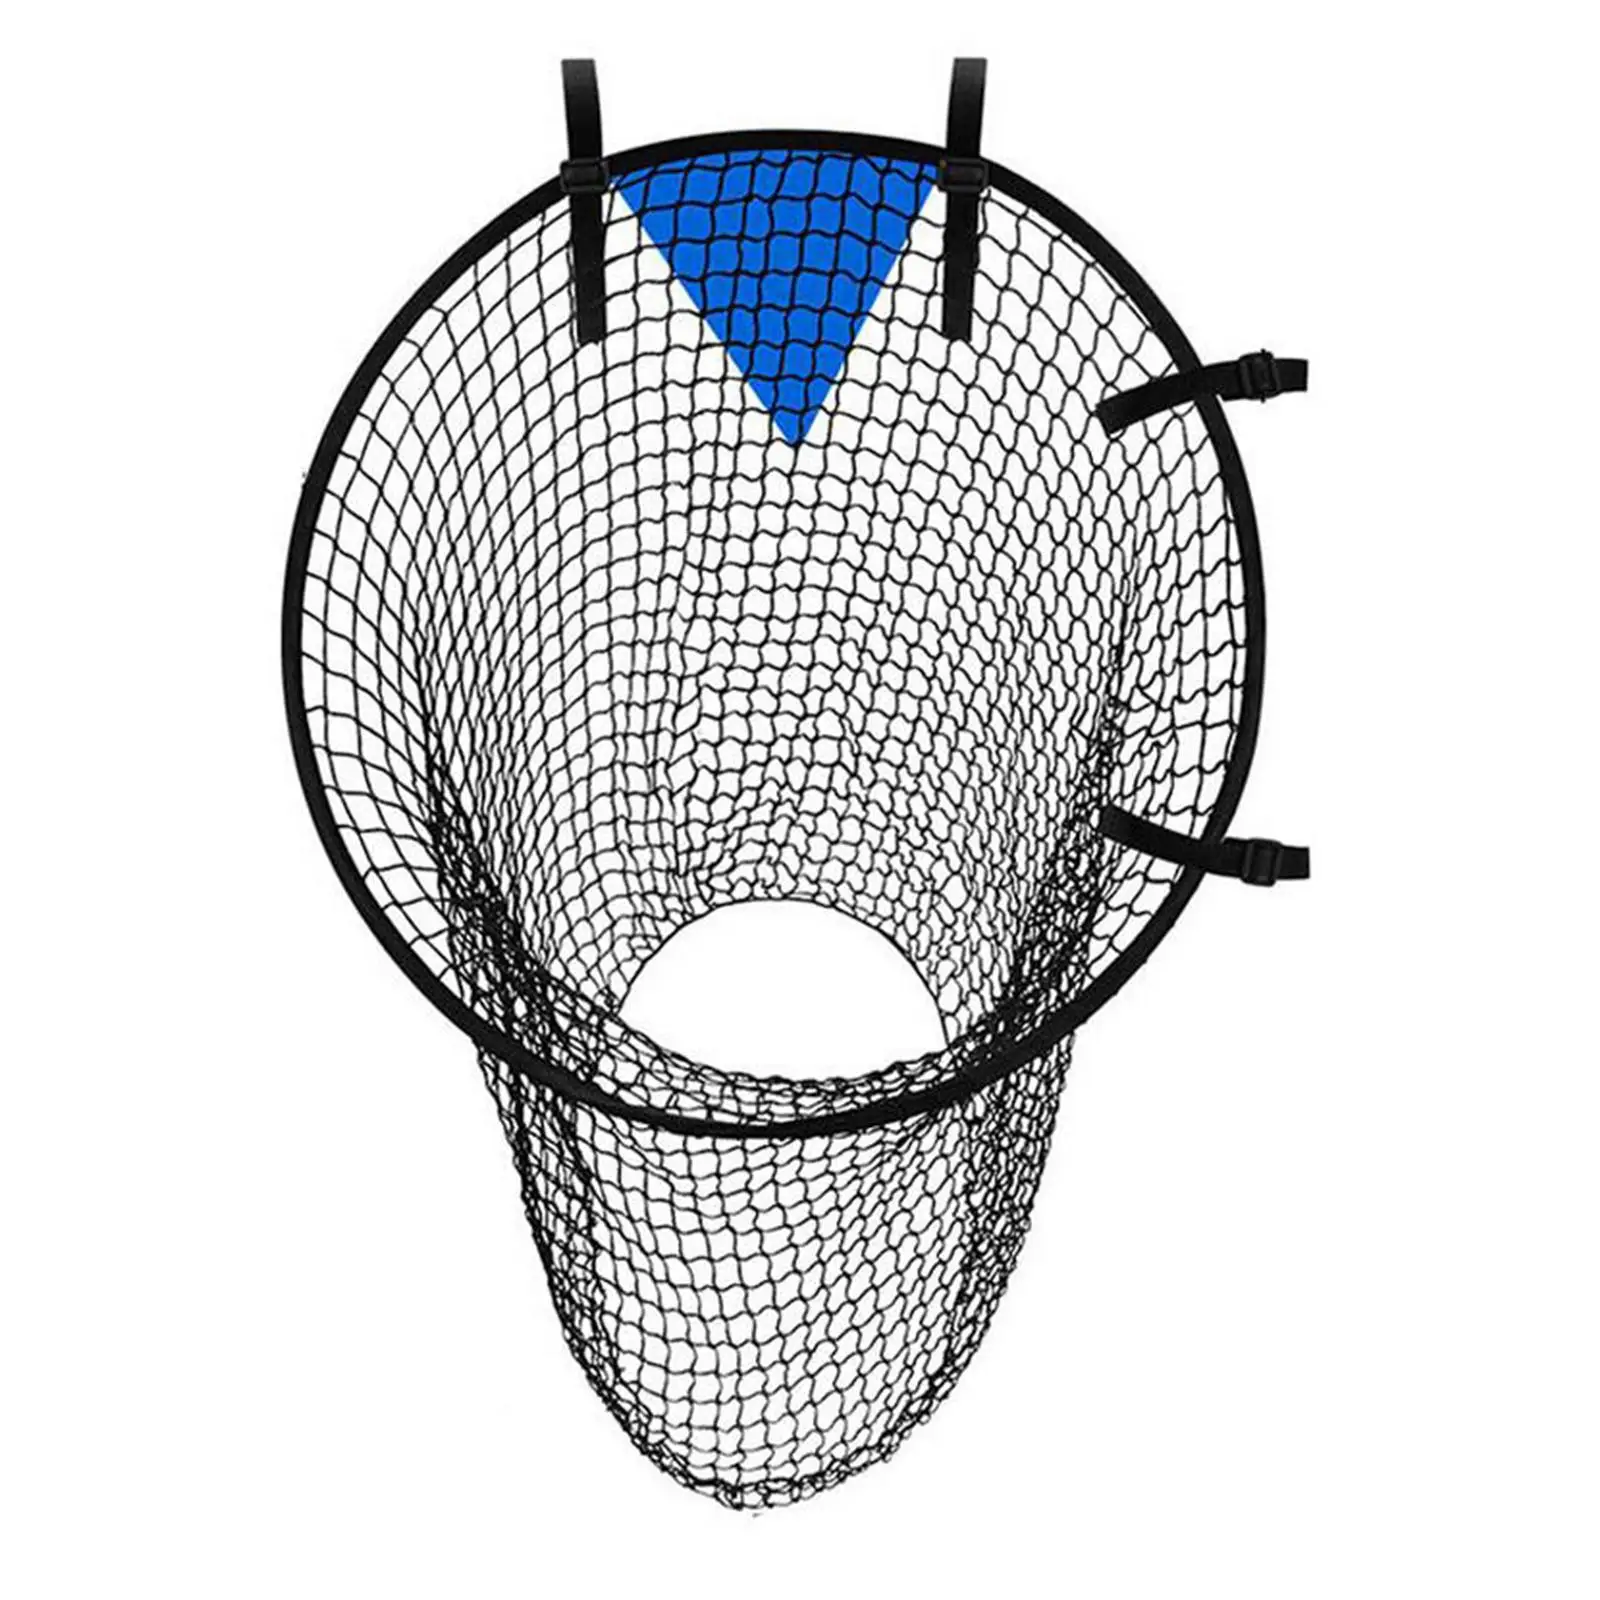 Football Training Net Adjustable Straps with Buckles Portable Foldable Accuracy Training Soccer Goal Target Net Beginners